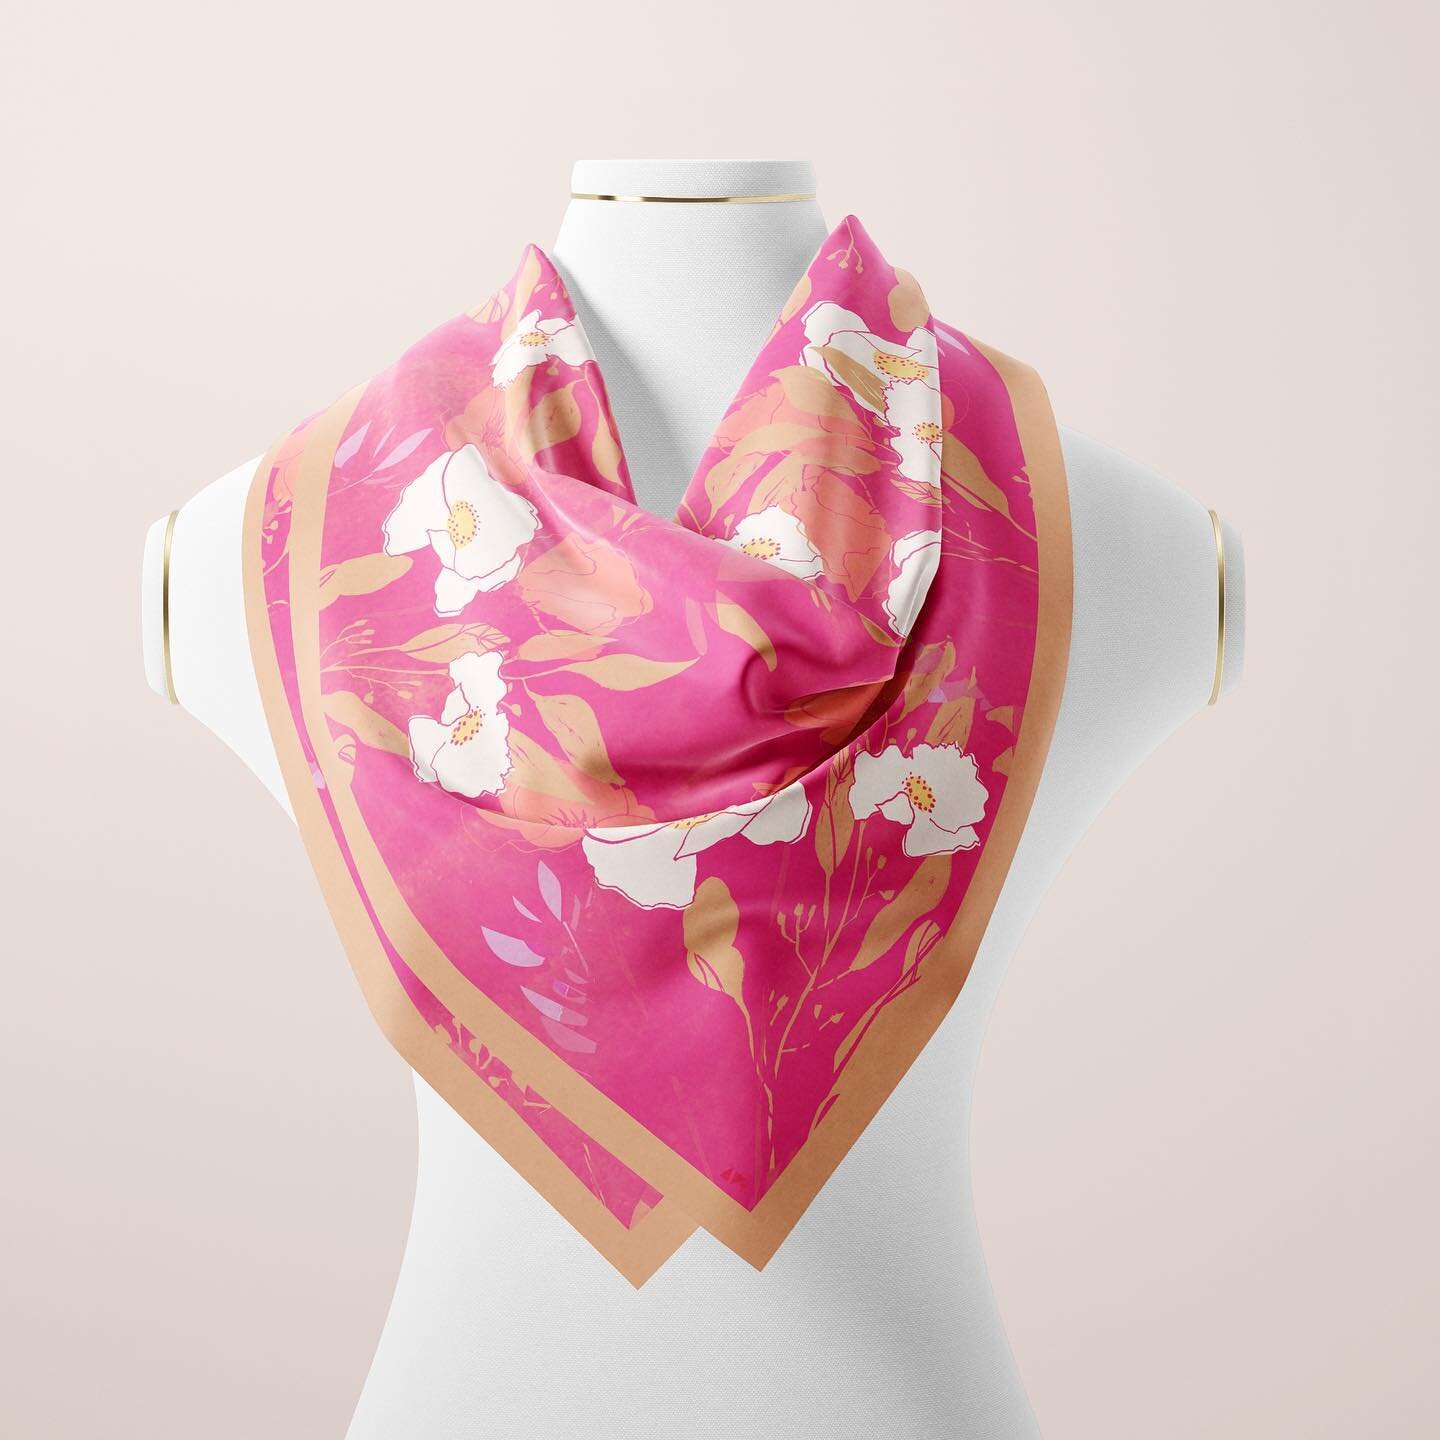 Wednesday Spring Style Vibes.✨

Looking For A Special Gift?✨ 

Purchase This Beautiful Botanical Silk Scarf For A Friend Or Yourself.✨

Link In Profile To Purchase.✨

Happy Spring Creative Friends!✨
.
.
.
#scarf 
#silkscarf 
#scarfstyle 
#scarfcollec